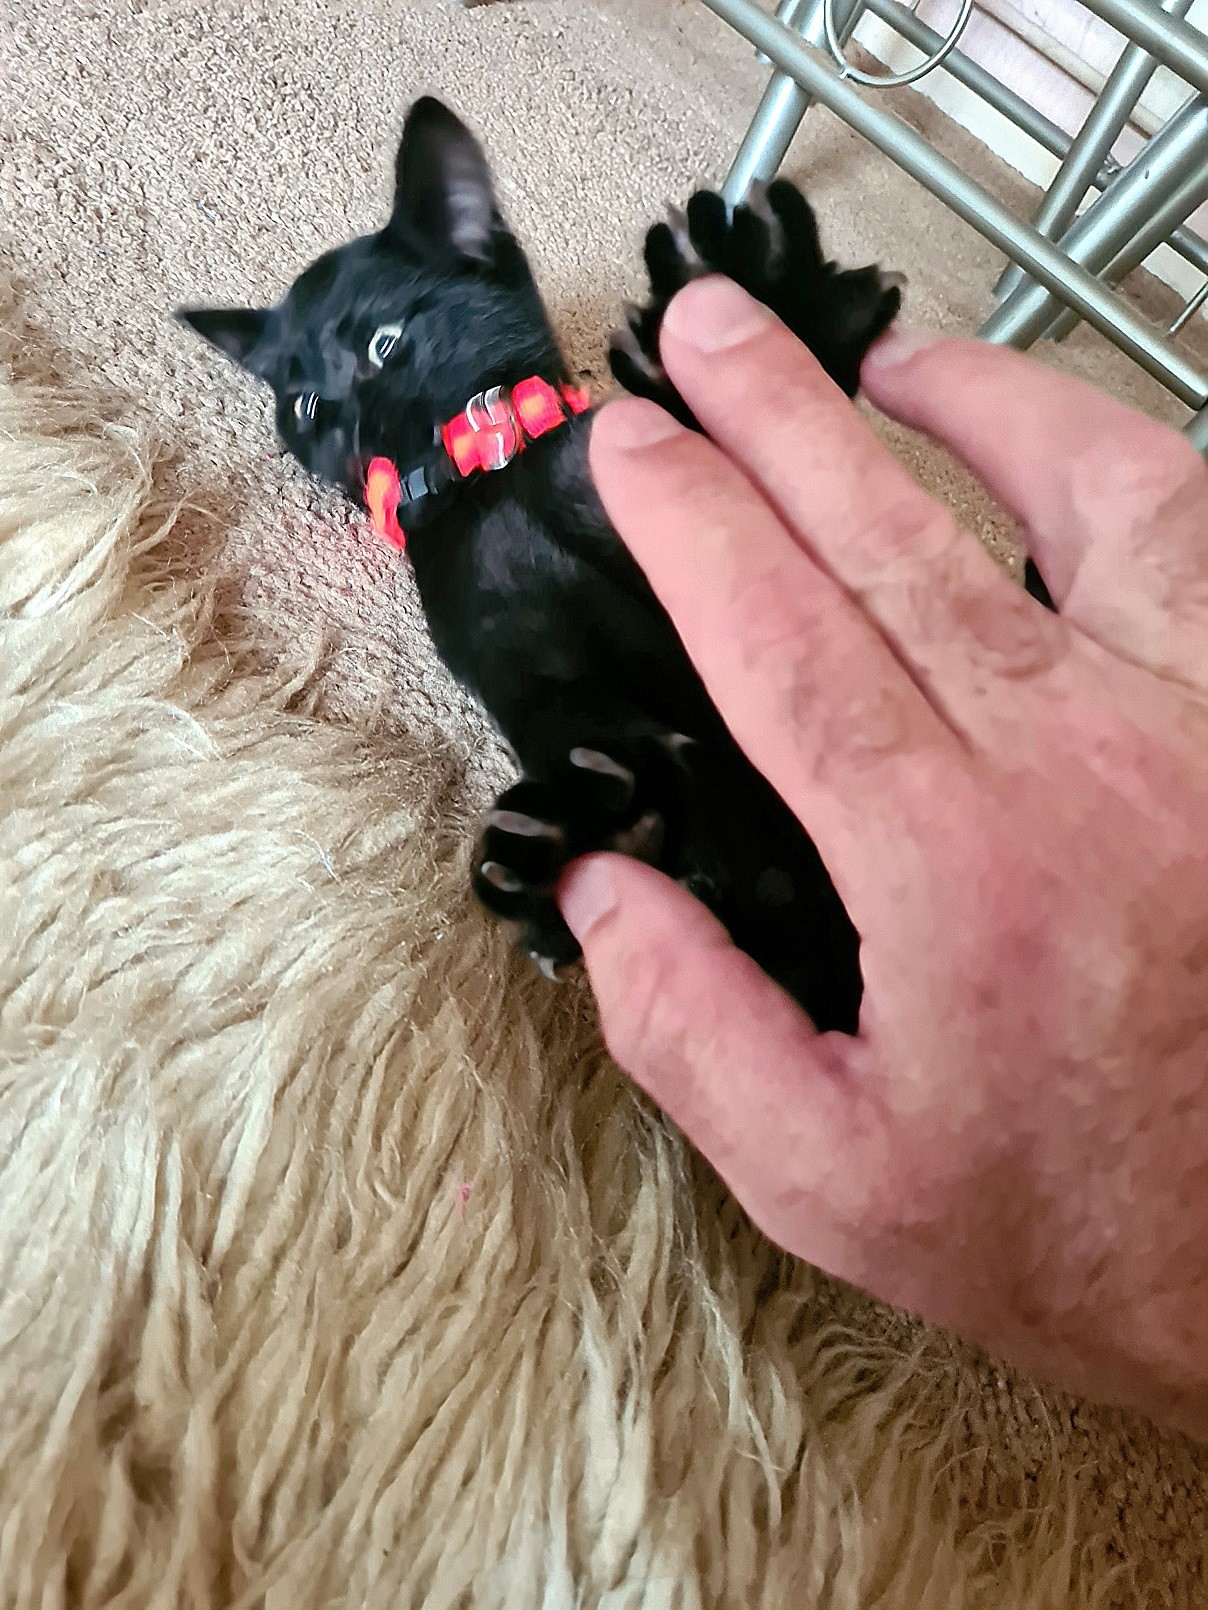 Step 2. Tiny black kitten is slightly blurred due to his motion in the photo as he playfully wriggles around and grabs my fingers.